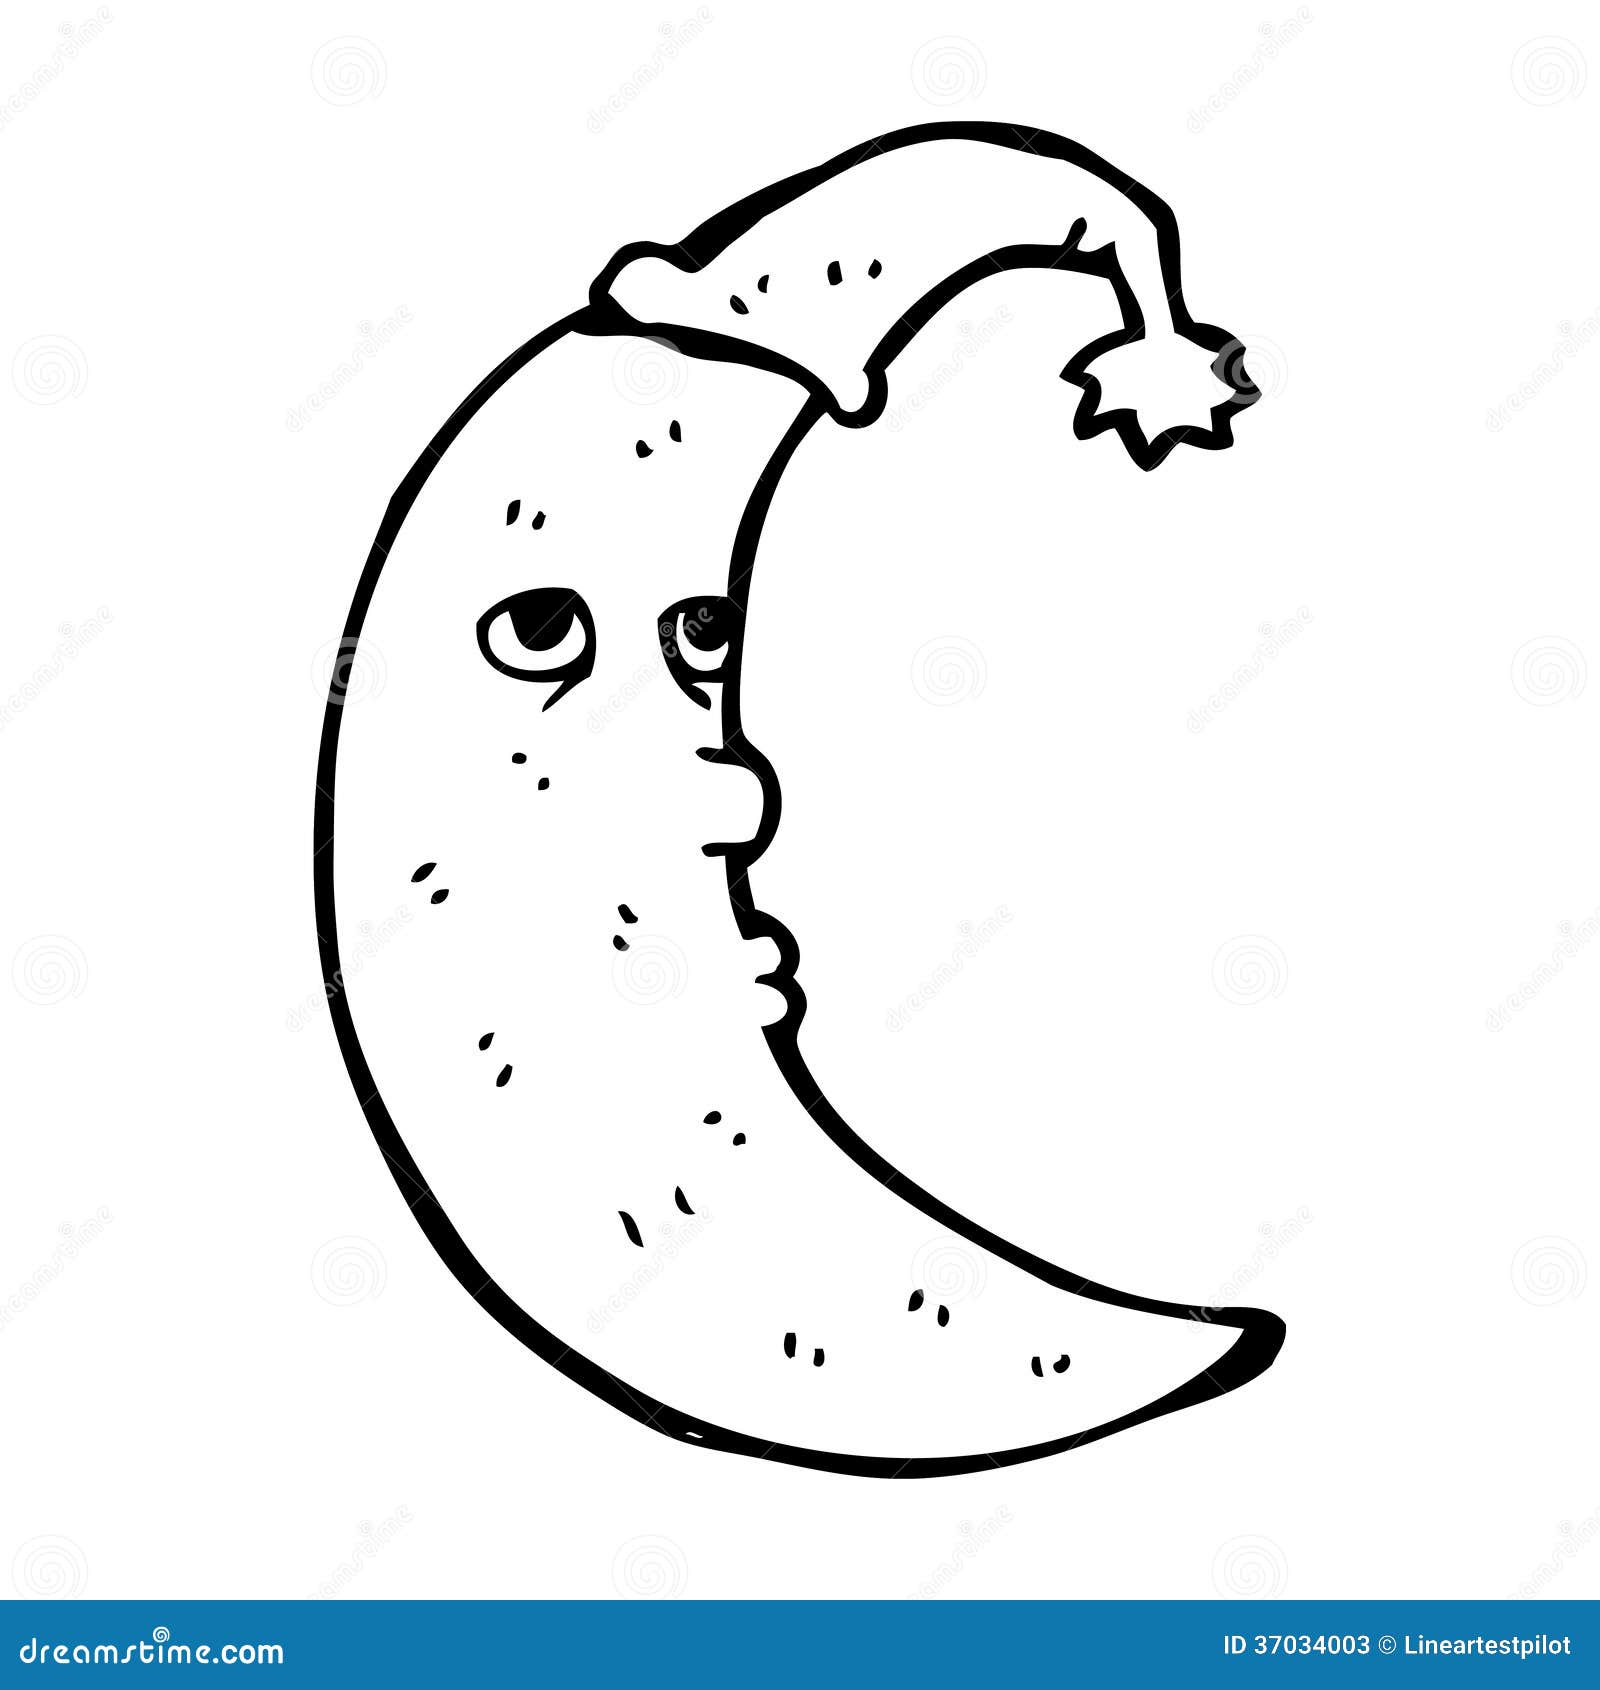 moon clipart black and white free - photo #48